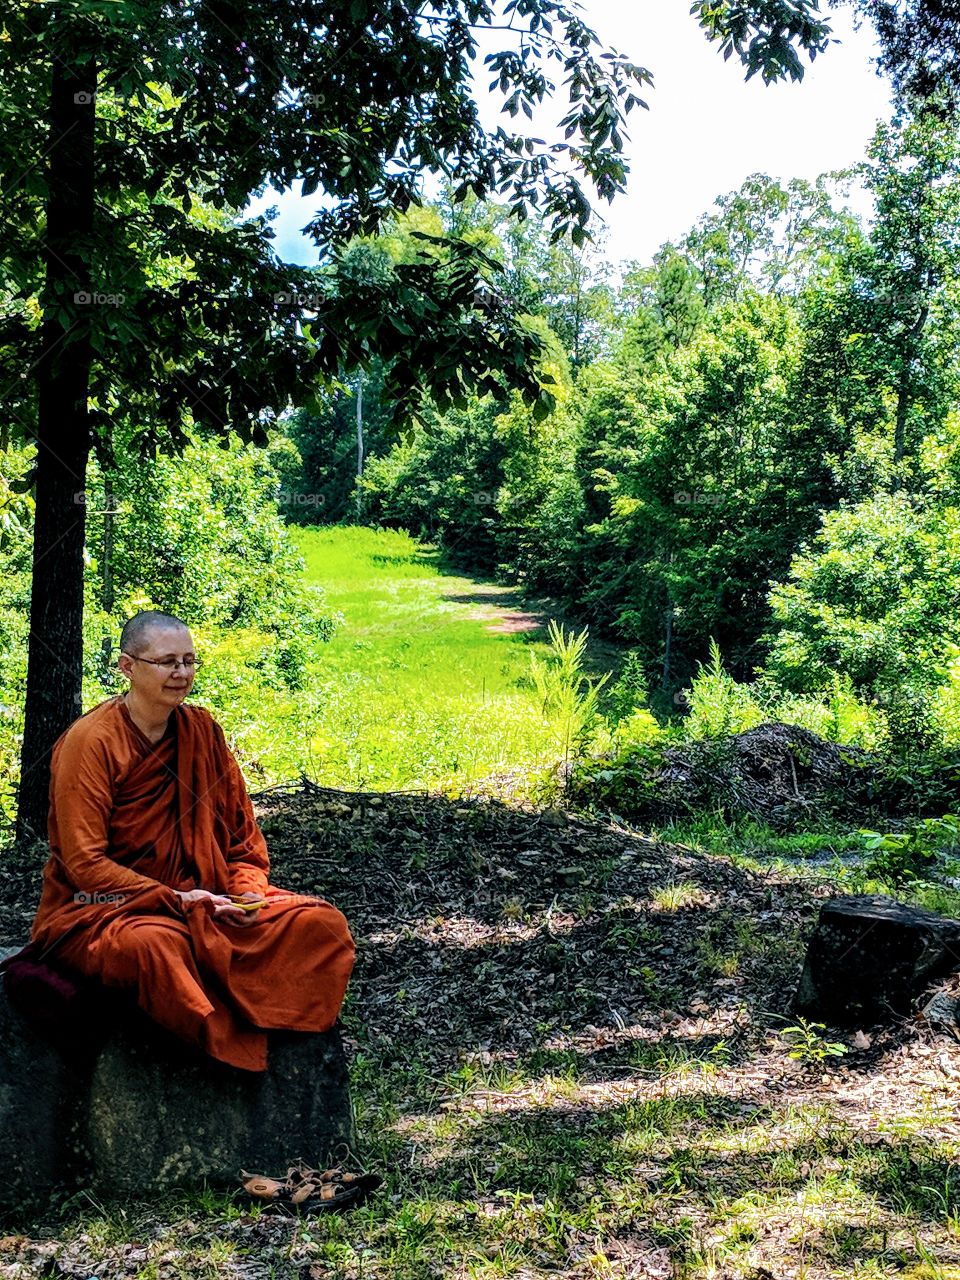 a Buddhist female monk, or bhikkhuni, sits in mindful meditation in a forest.